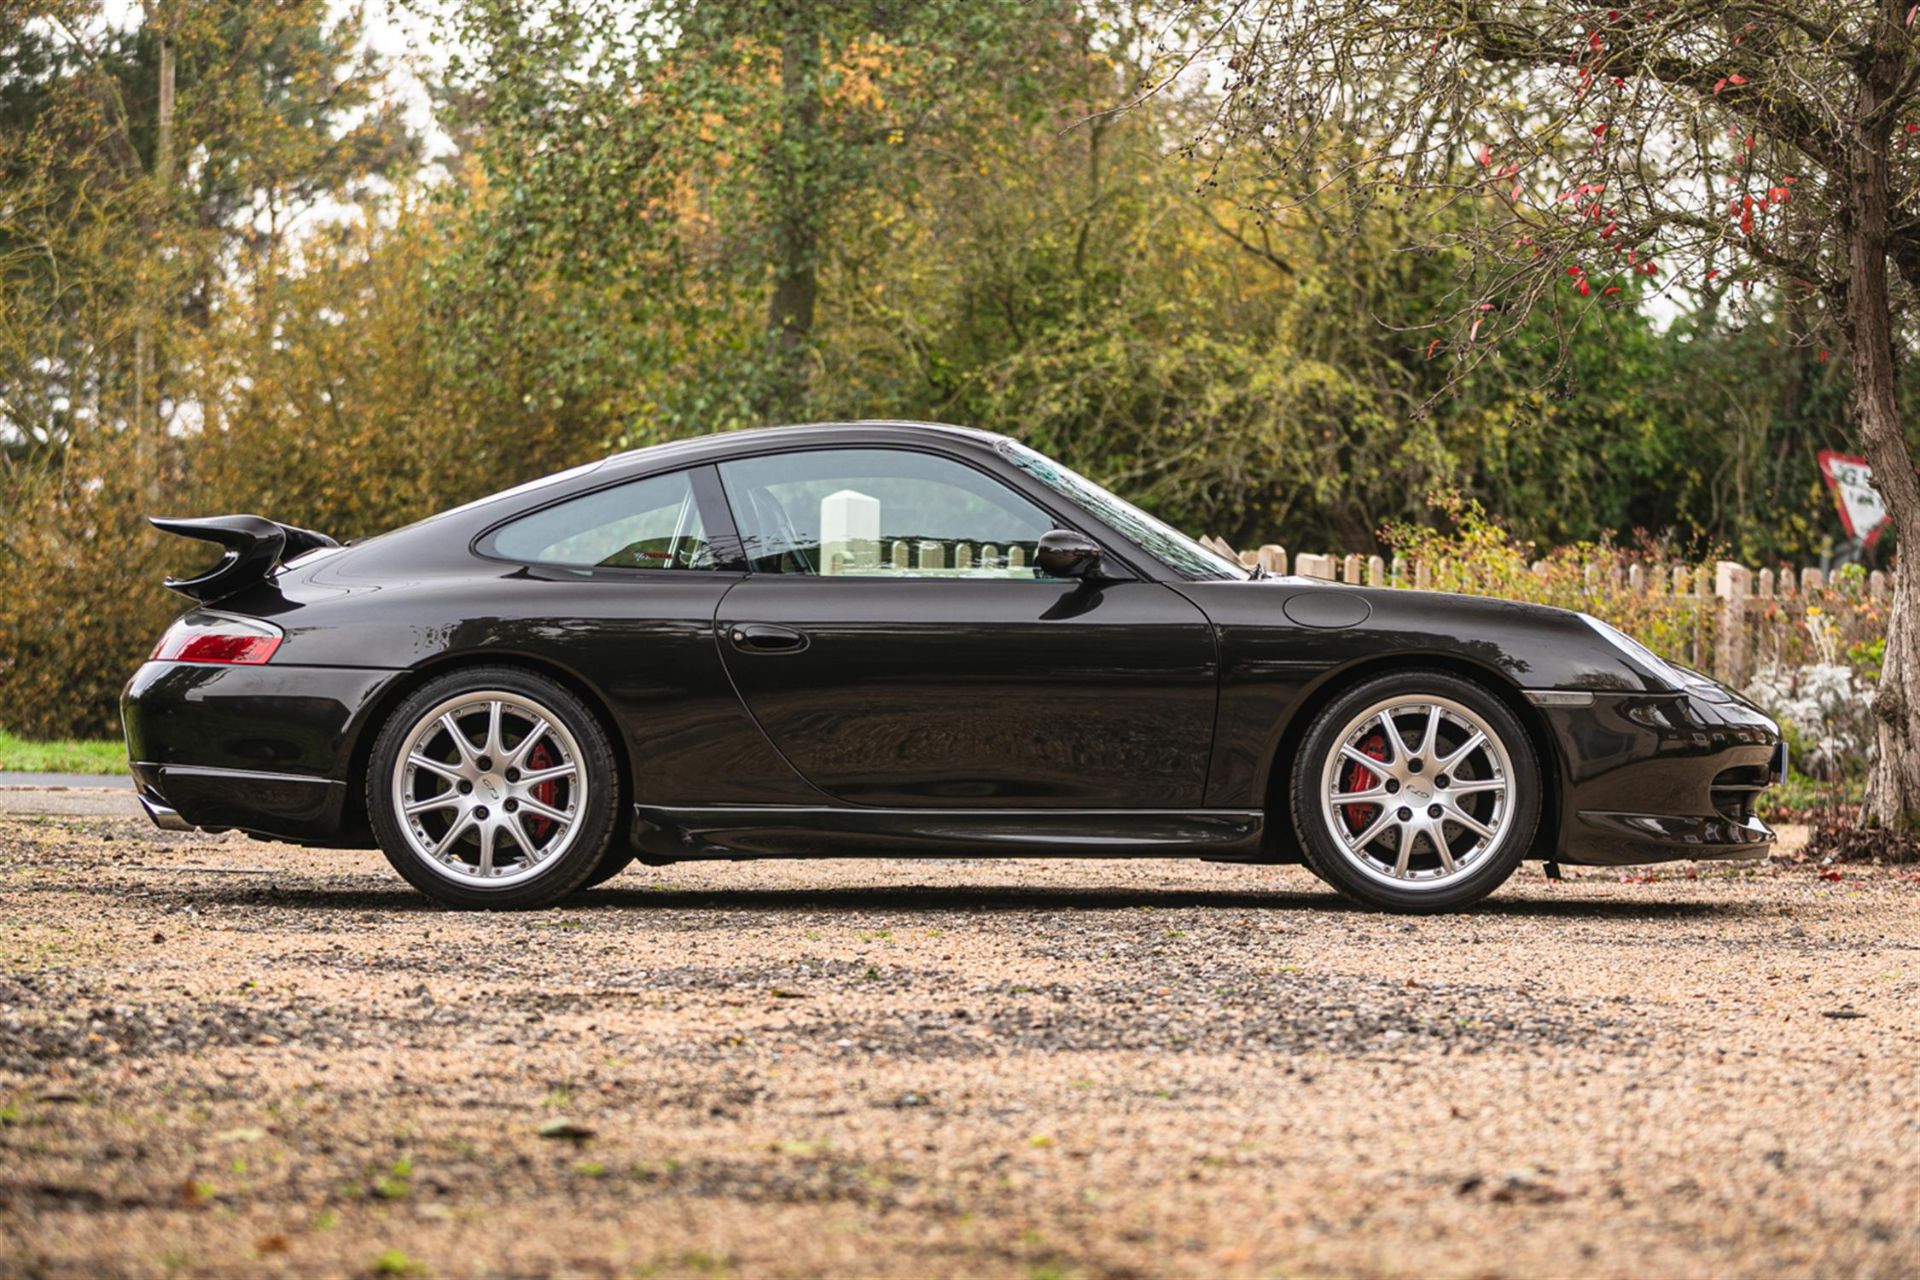 1999 Porsche 911 (996) Carrera (X51) with factory GT3 options - Image 5 of 10